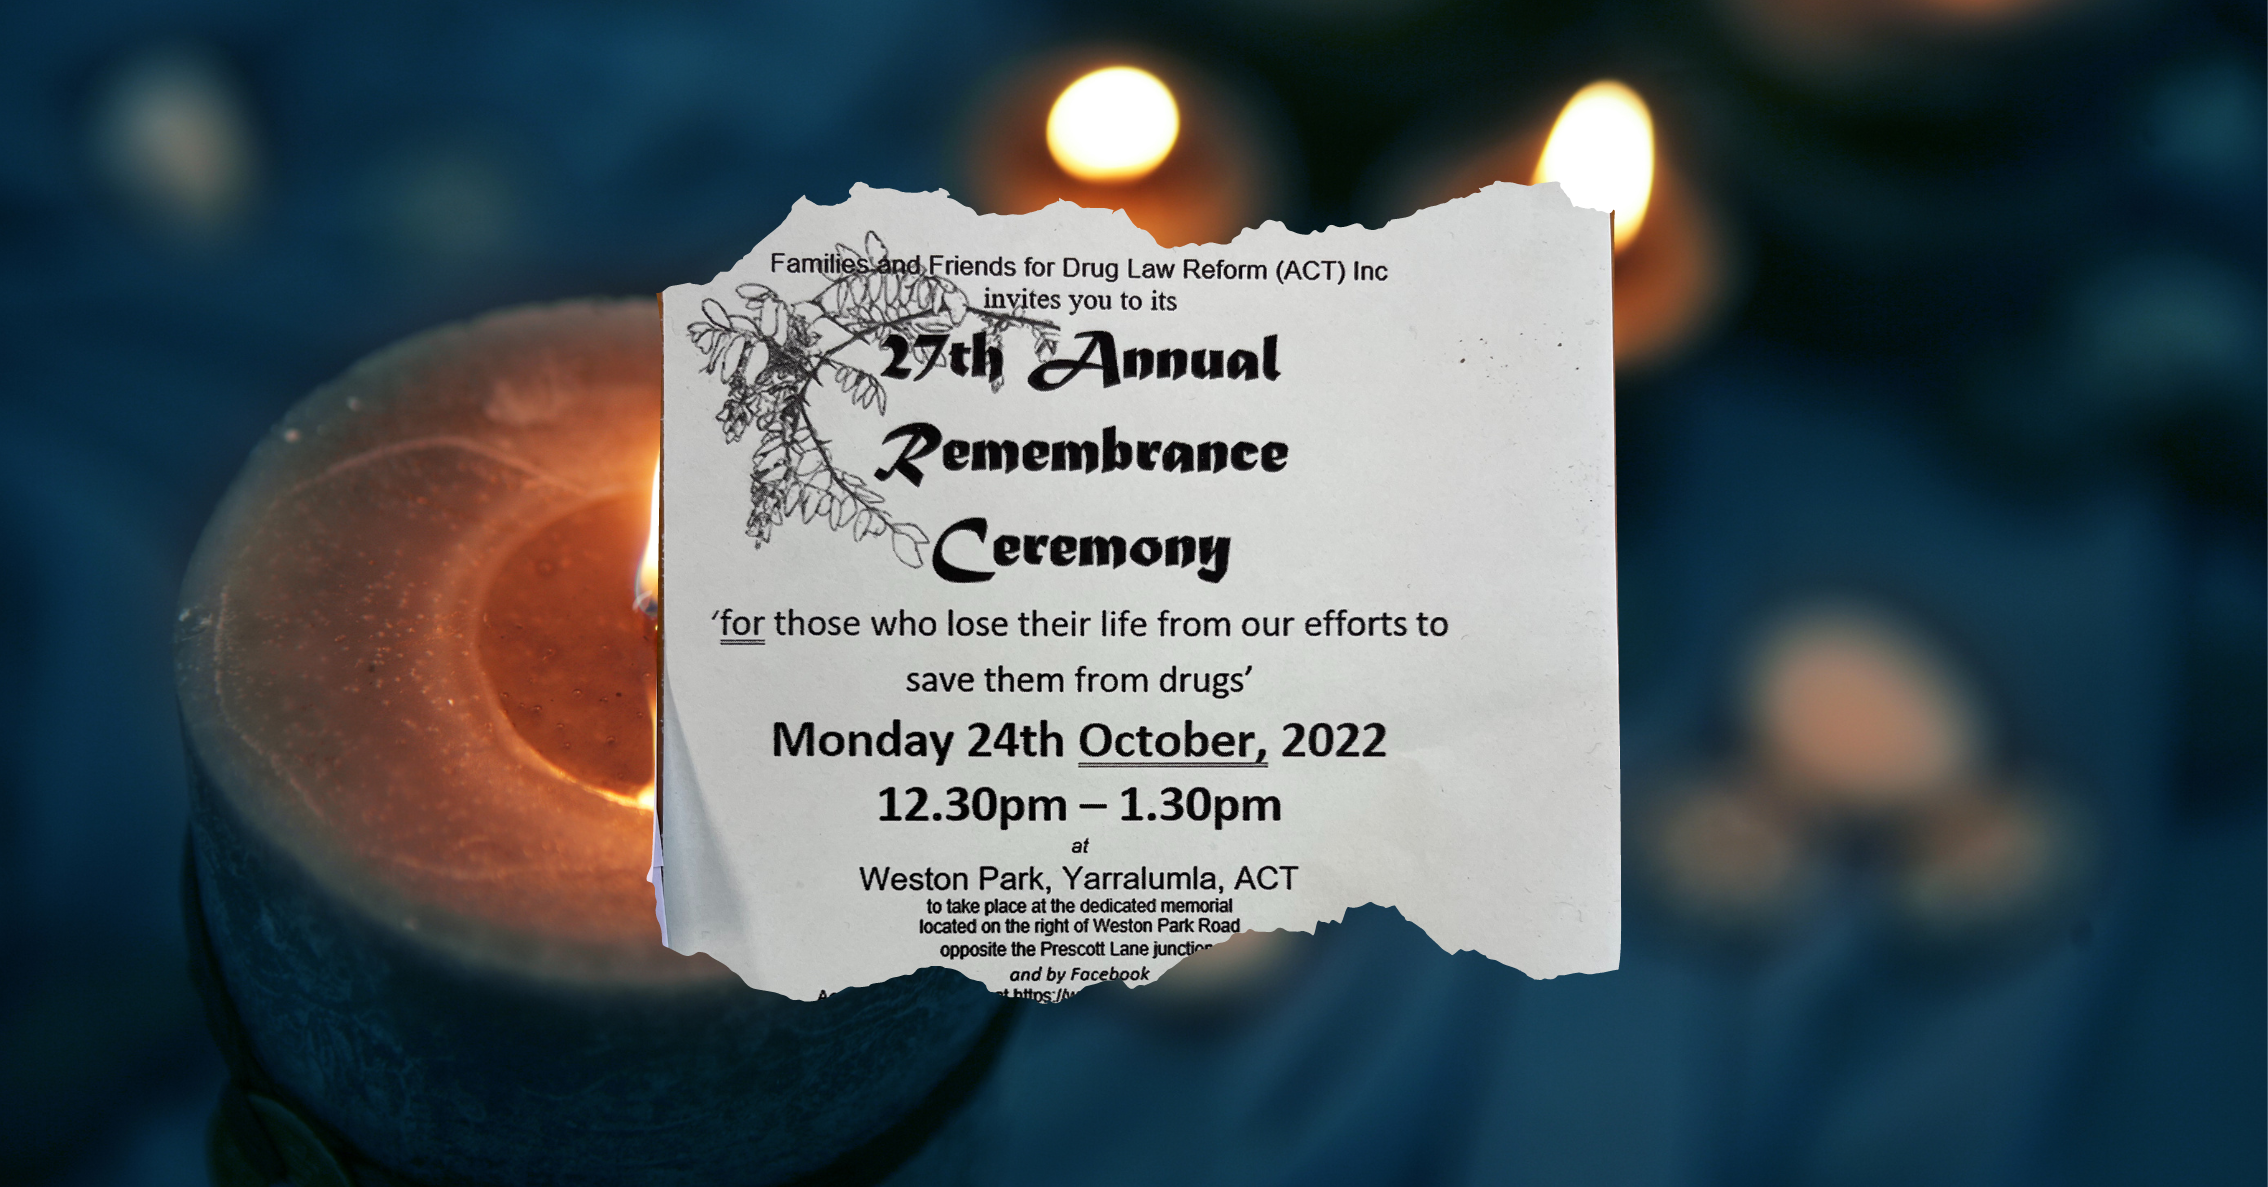 Featured image for “AIVL and CAHMA at the 27th Annual Remembrance Ceremony for those who lose their life to illicit drugs”